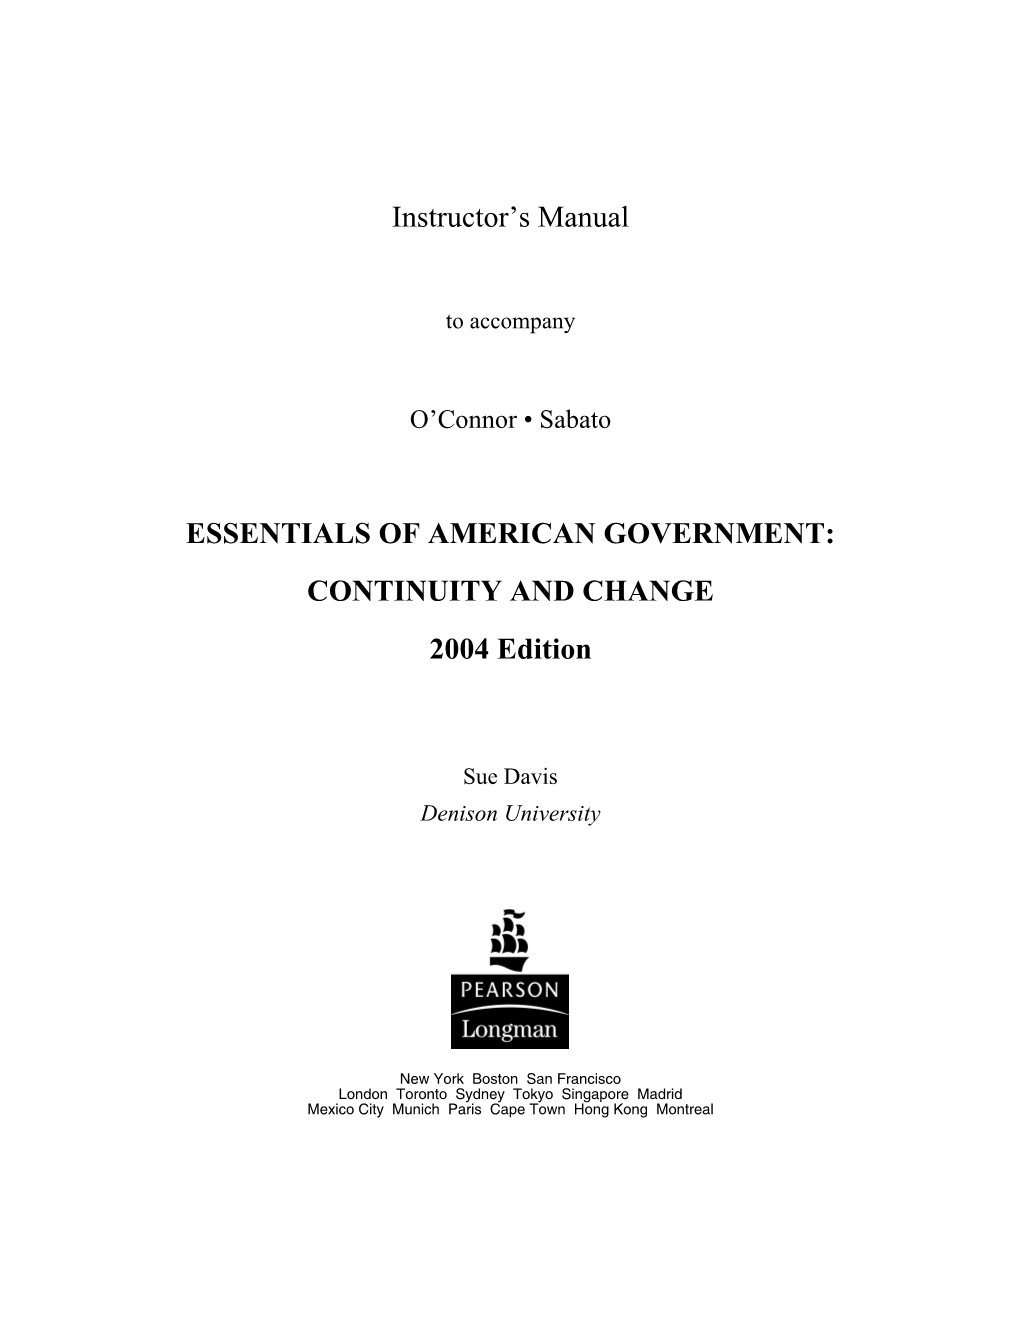 Instructor's Manual ESSENTIALS of AMERICAN GOVERNMENT: CONTINUITY and CHANGE 2004 Edition